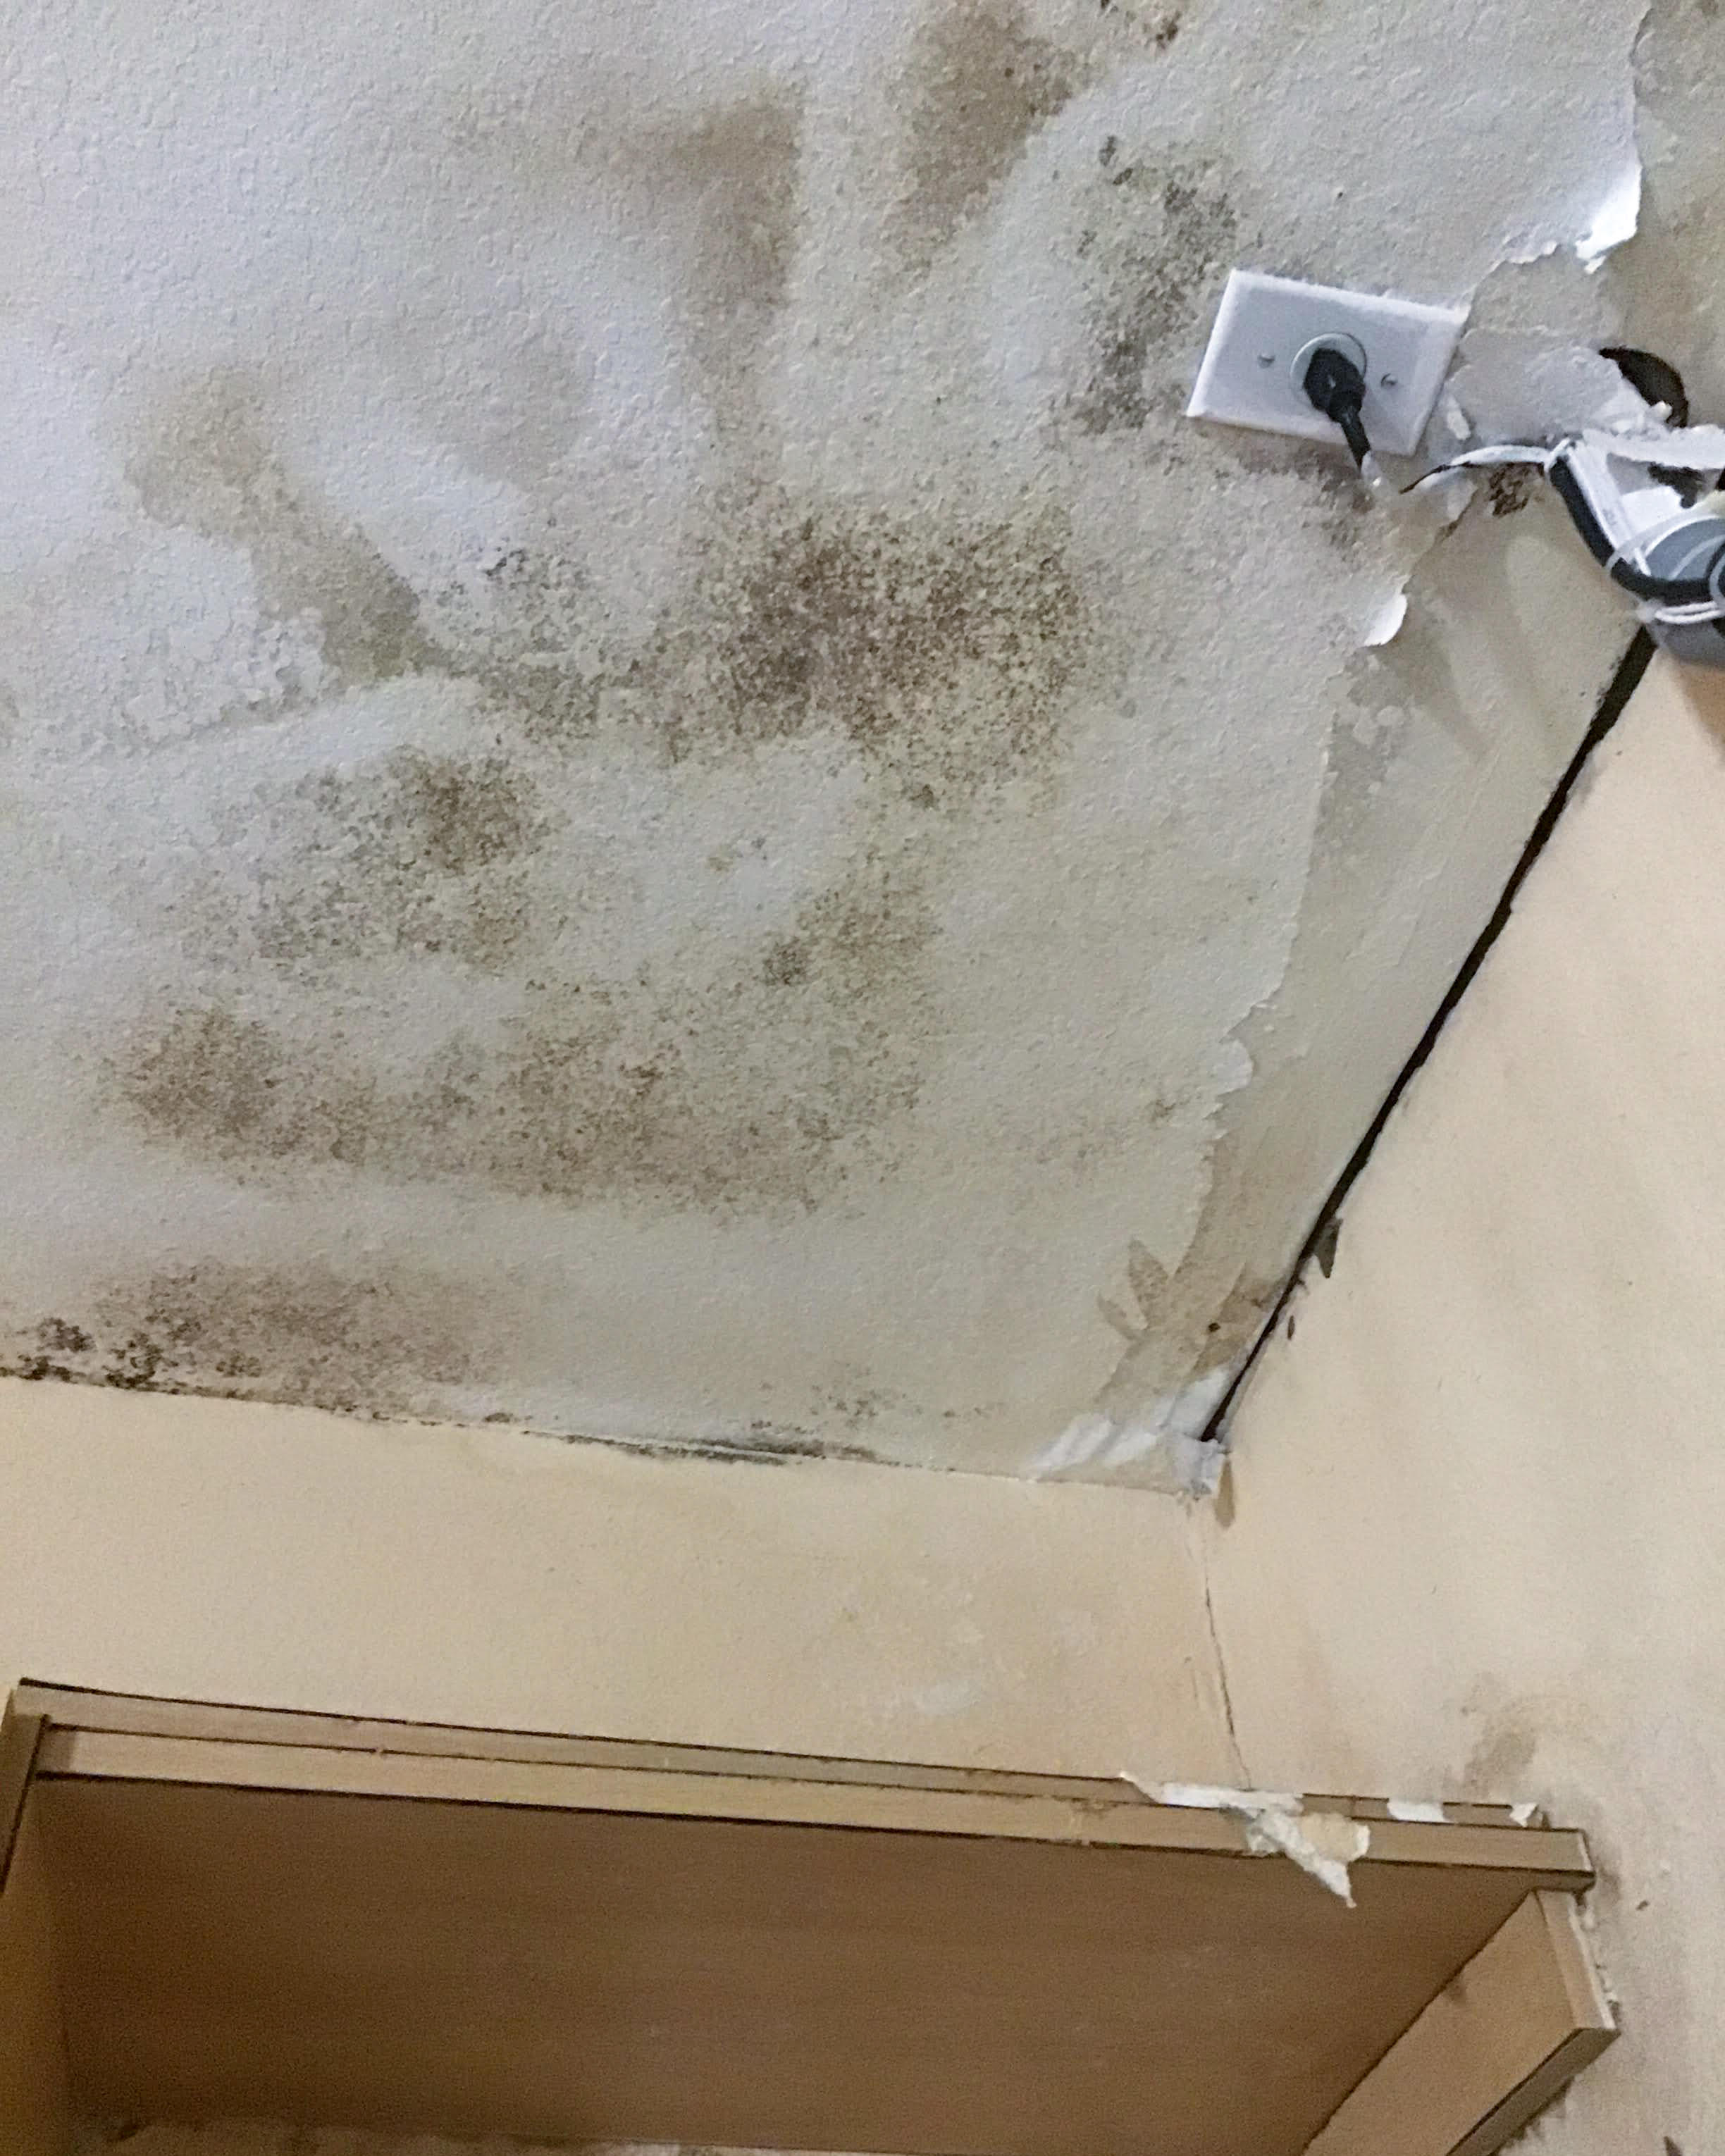 Once formed, mold can quickly spread throughout your Boca Raton home and business and cause severe damage to your property.